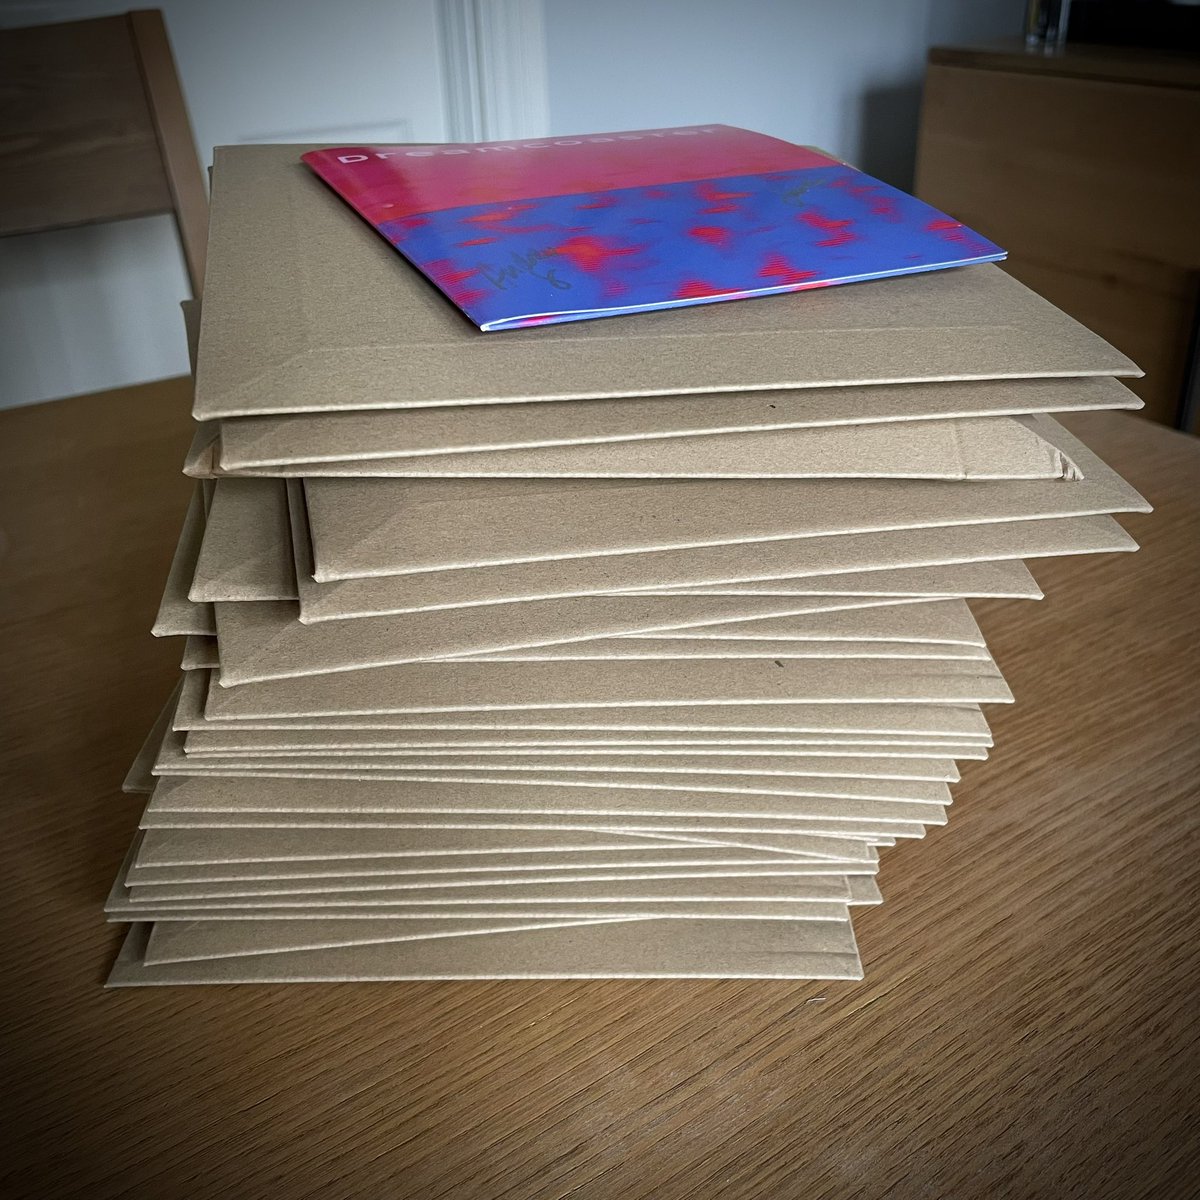 Now officially sold out, we’ve signed and packed copies of our new record “So Long” ready to send around the world. We’ve raised lots of money for @TeenageCancer (we’ll do the maths but about £150) so a huge thank you to everyone who supported 💙💙